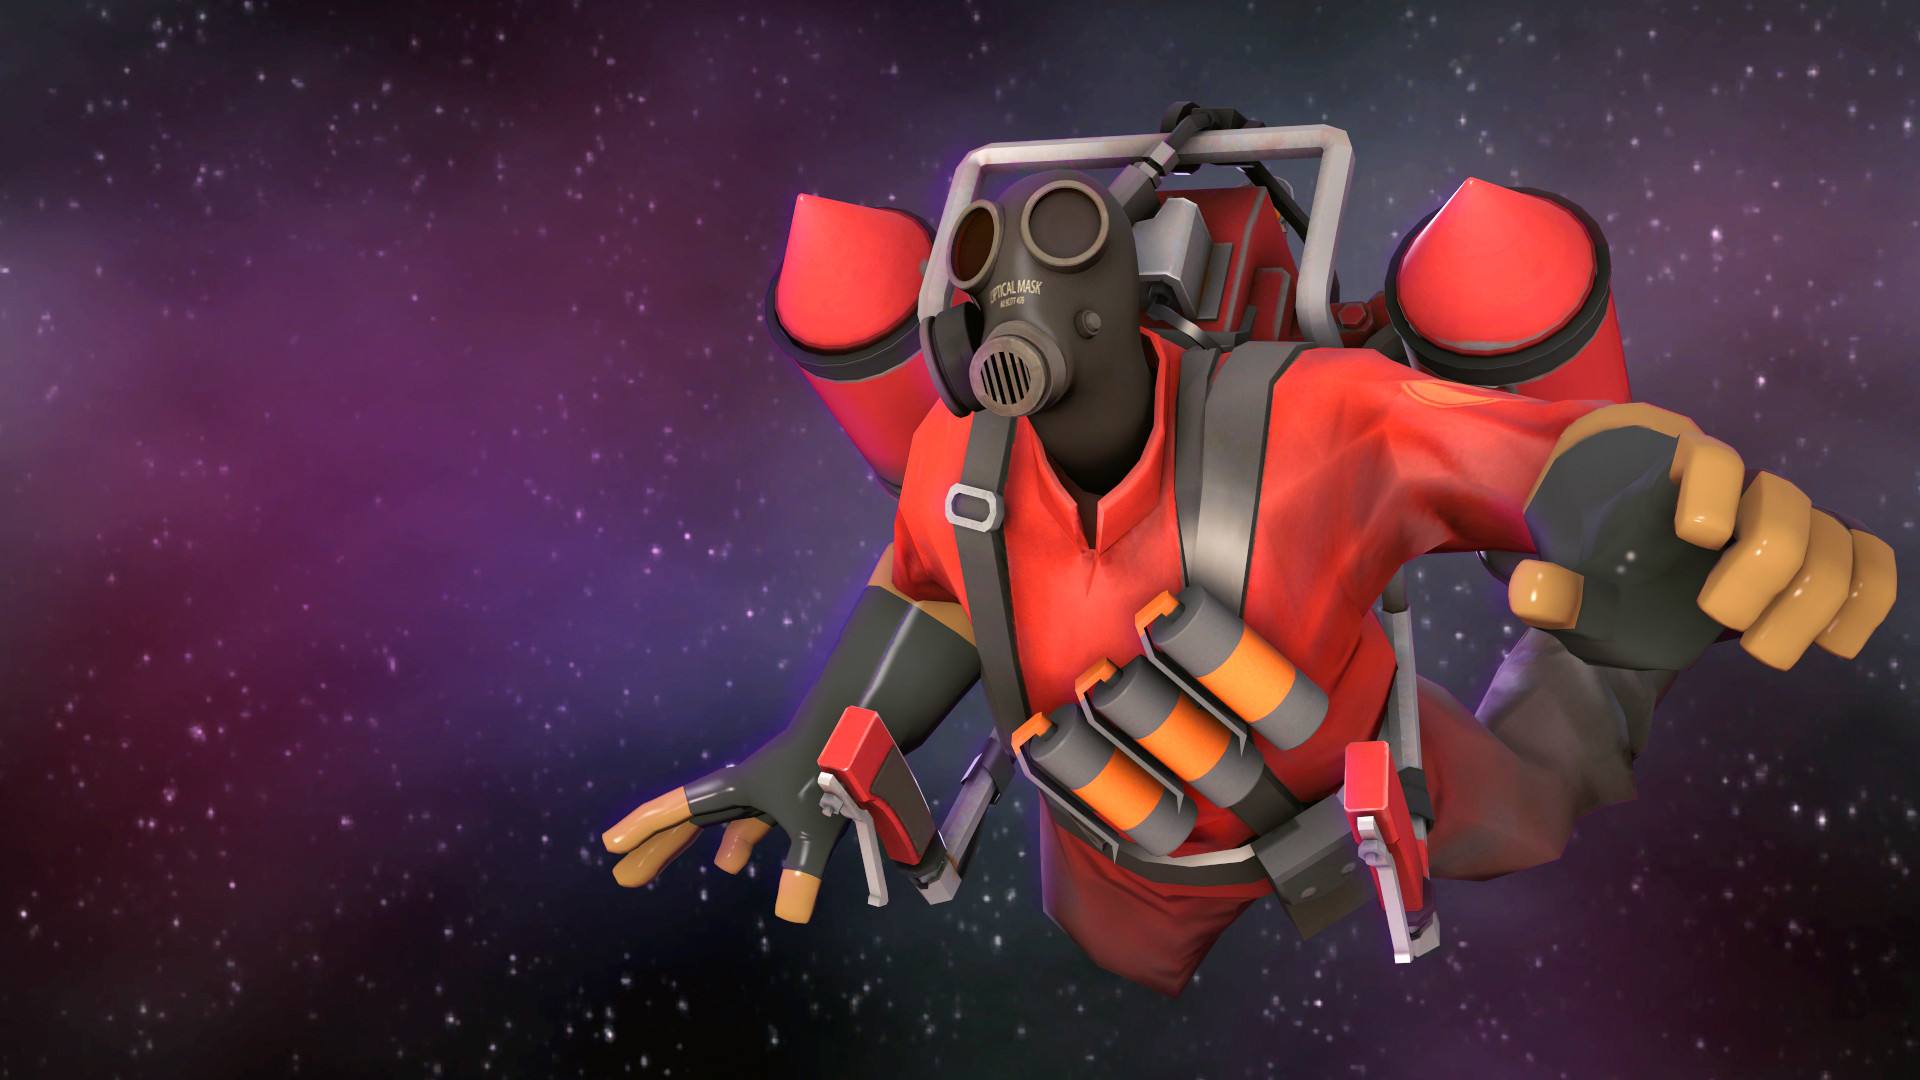 1920x1080 Made a space pyro wallpaper, I think it turned out quite nicelyArtwork  (i.redd.it)